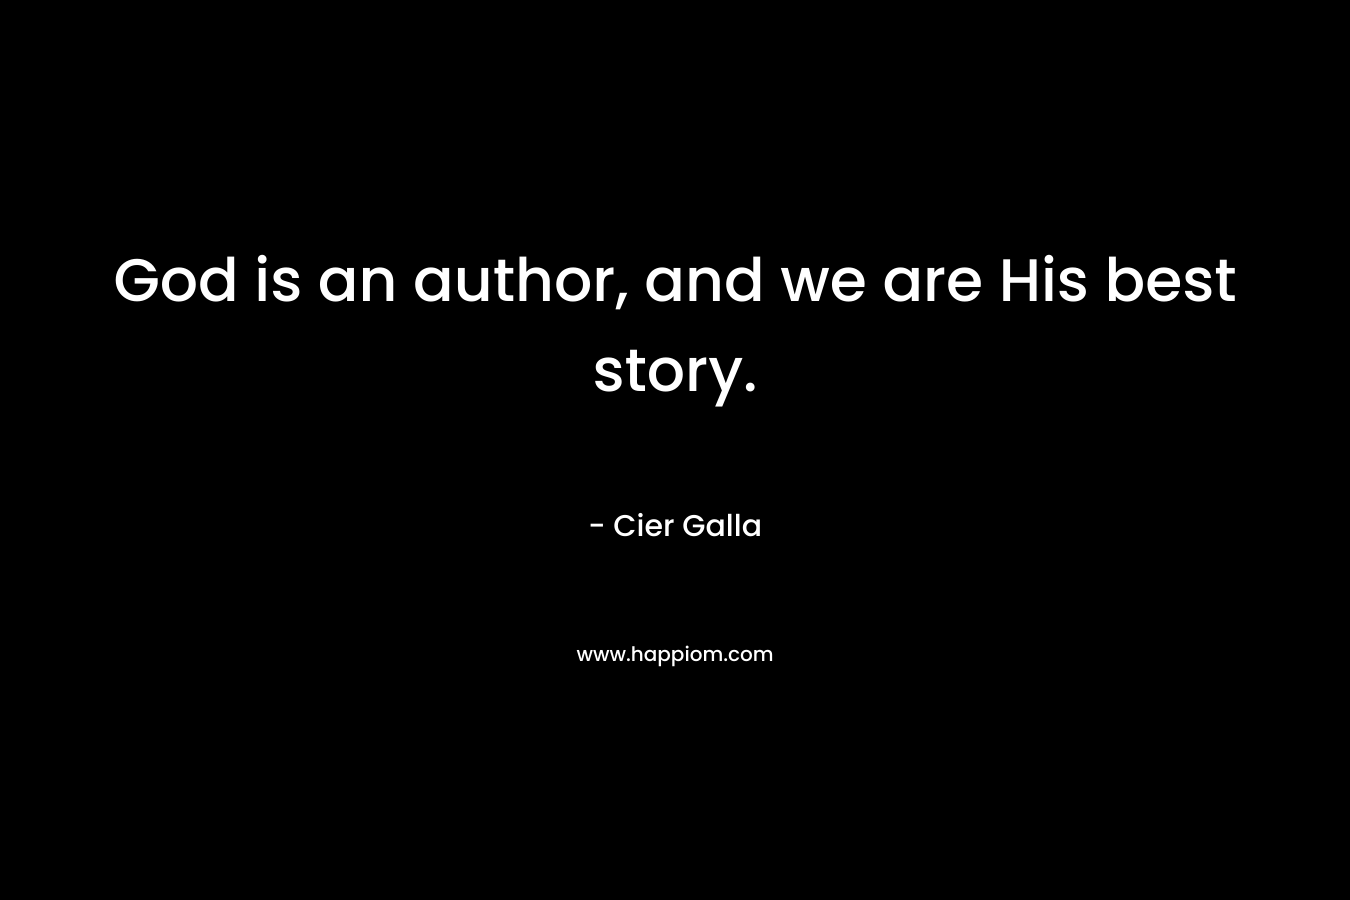 God is an author, and we are His best story.